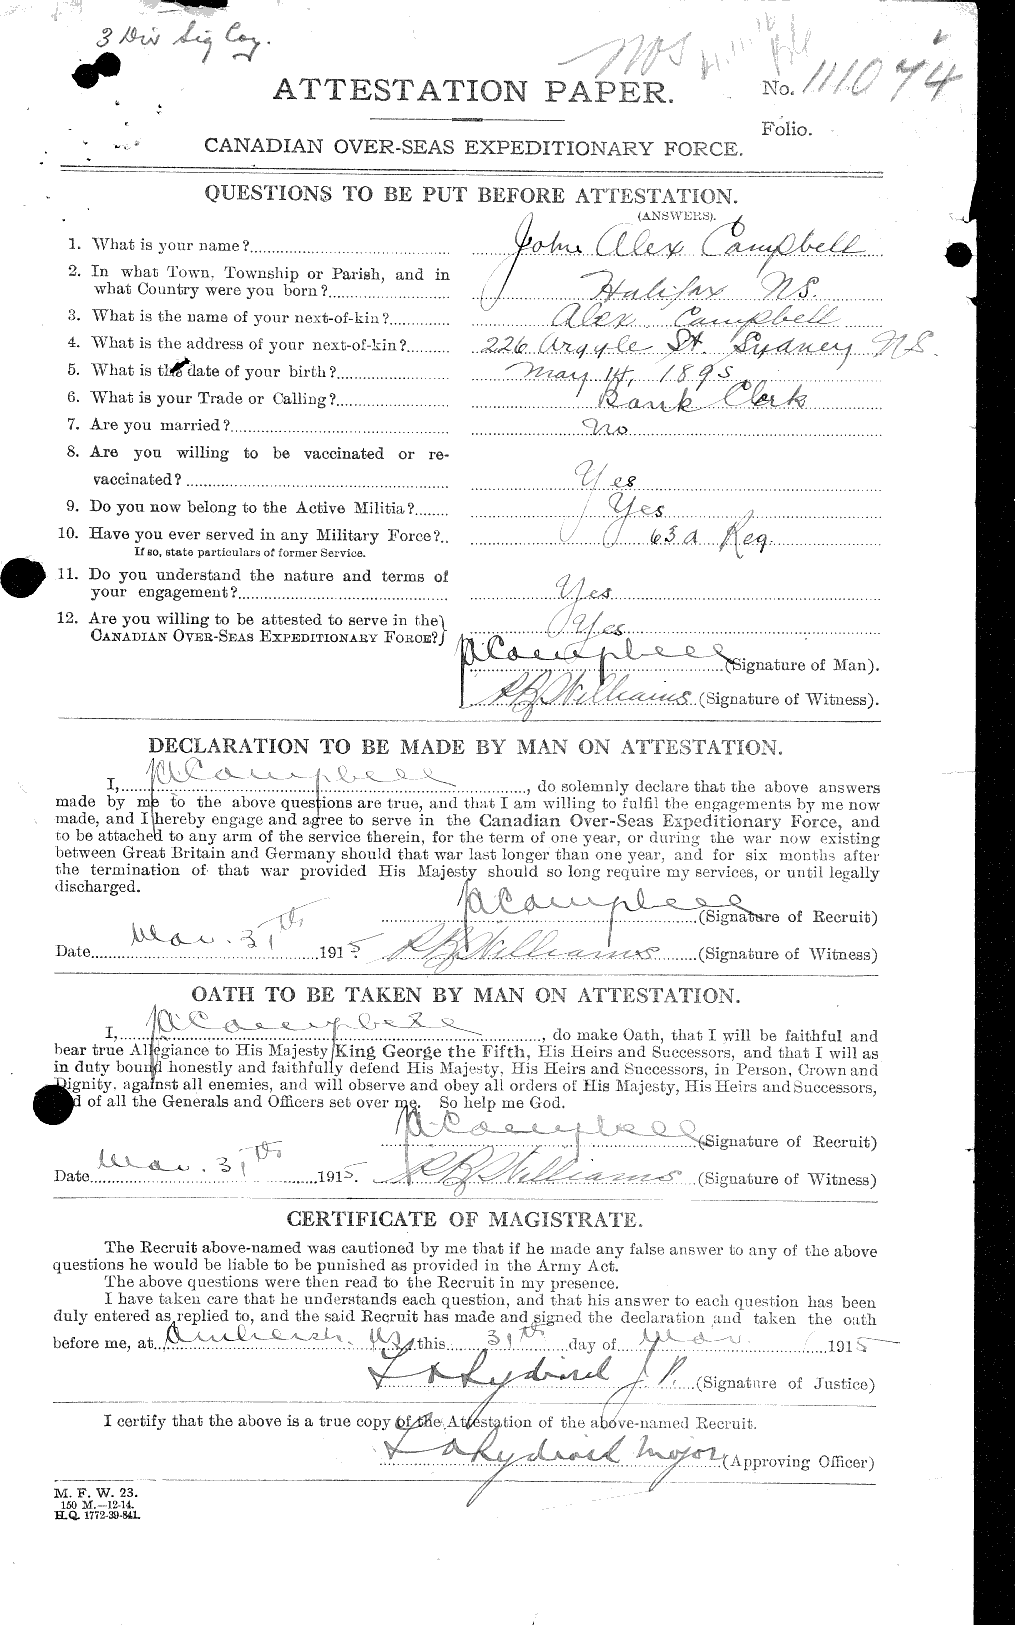 Personnel Records of the First World War - CEF 006855a